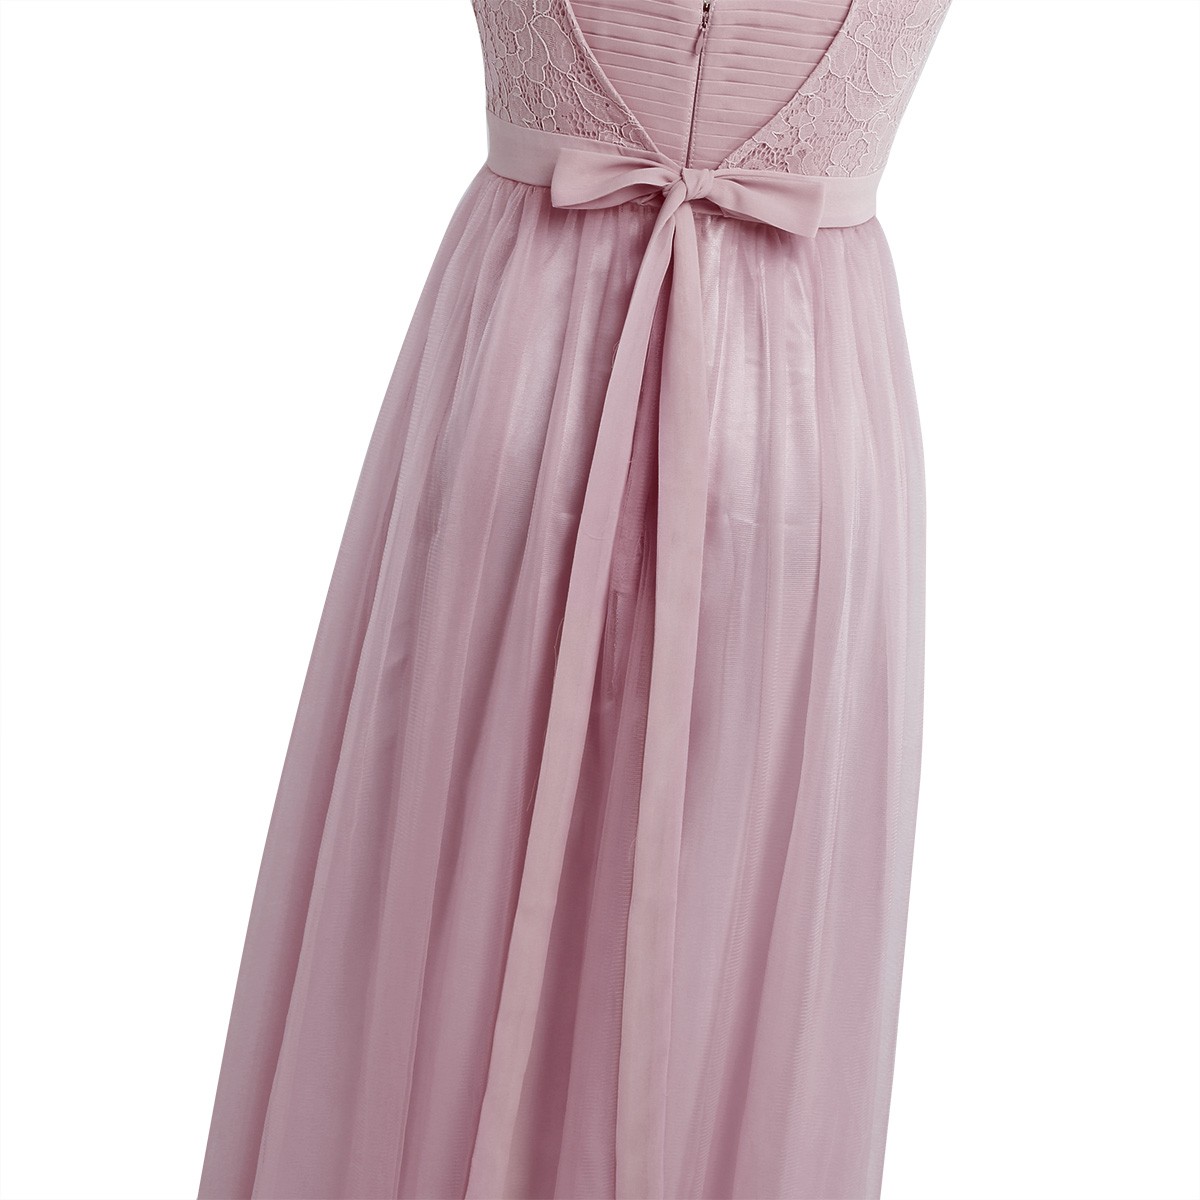 dusty rose tulle bridesmaid dresses